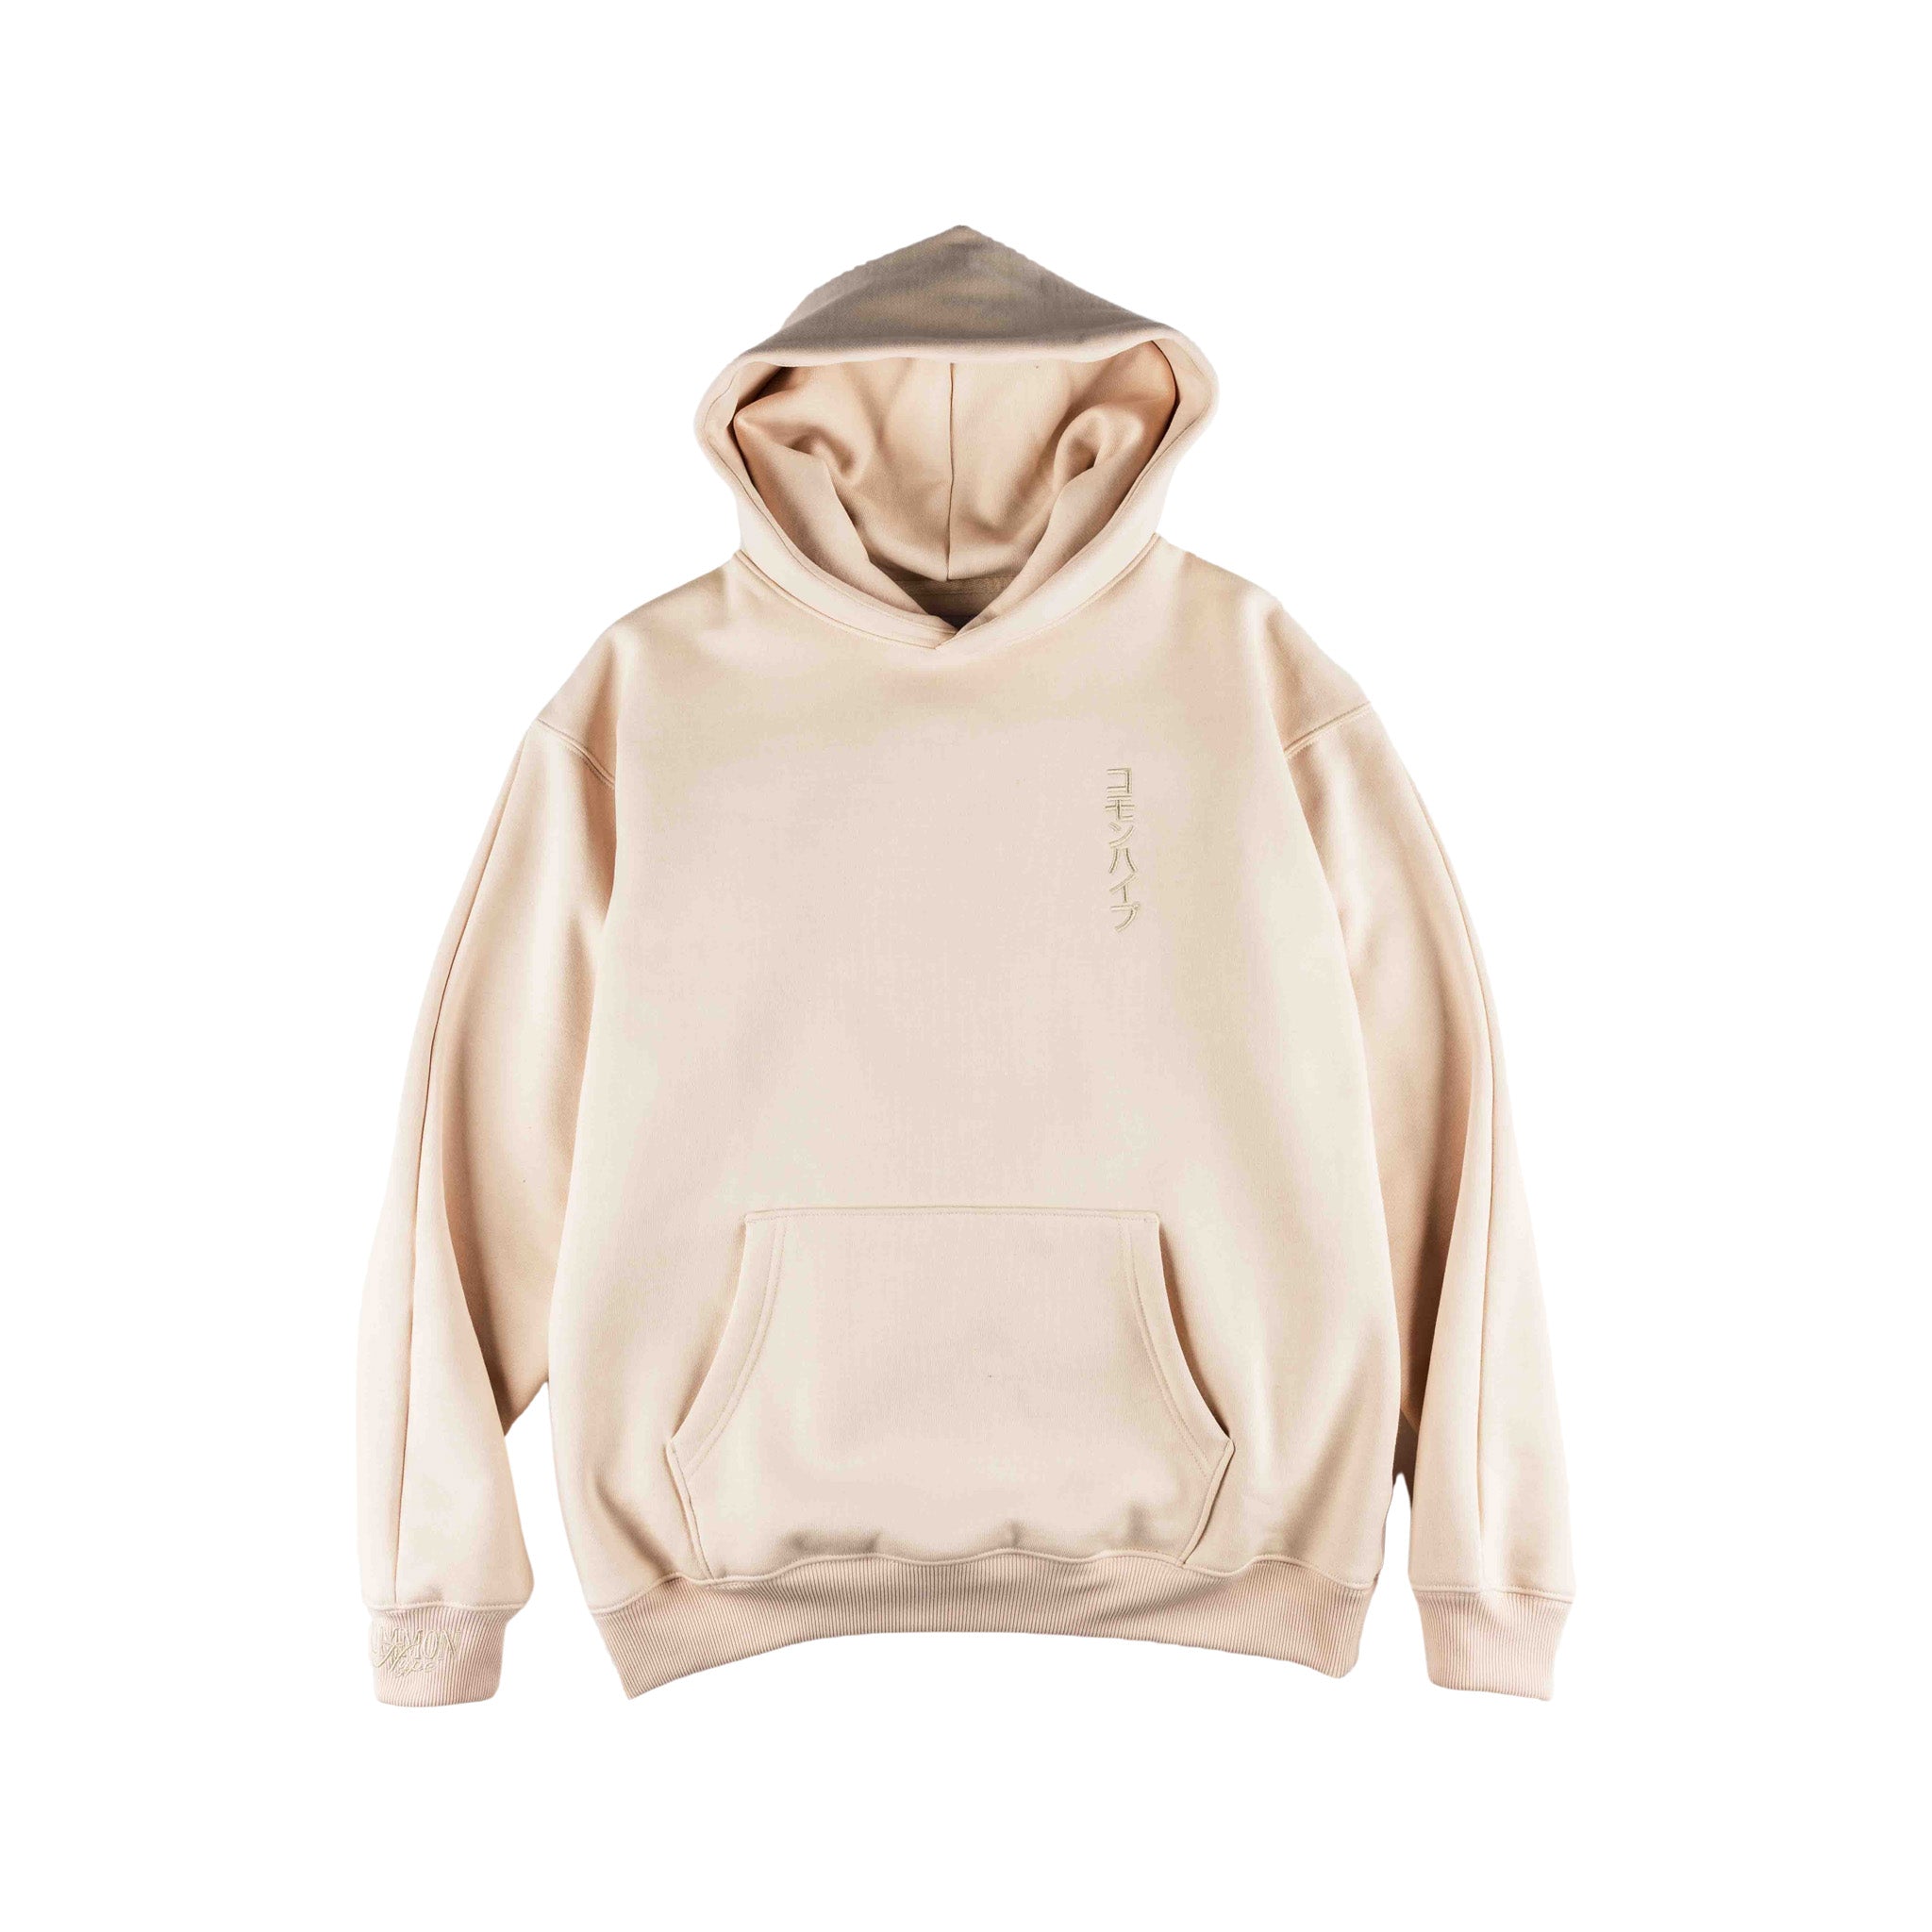 Common Hype Basic Hoodie ‘Antique White’